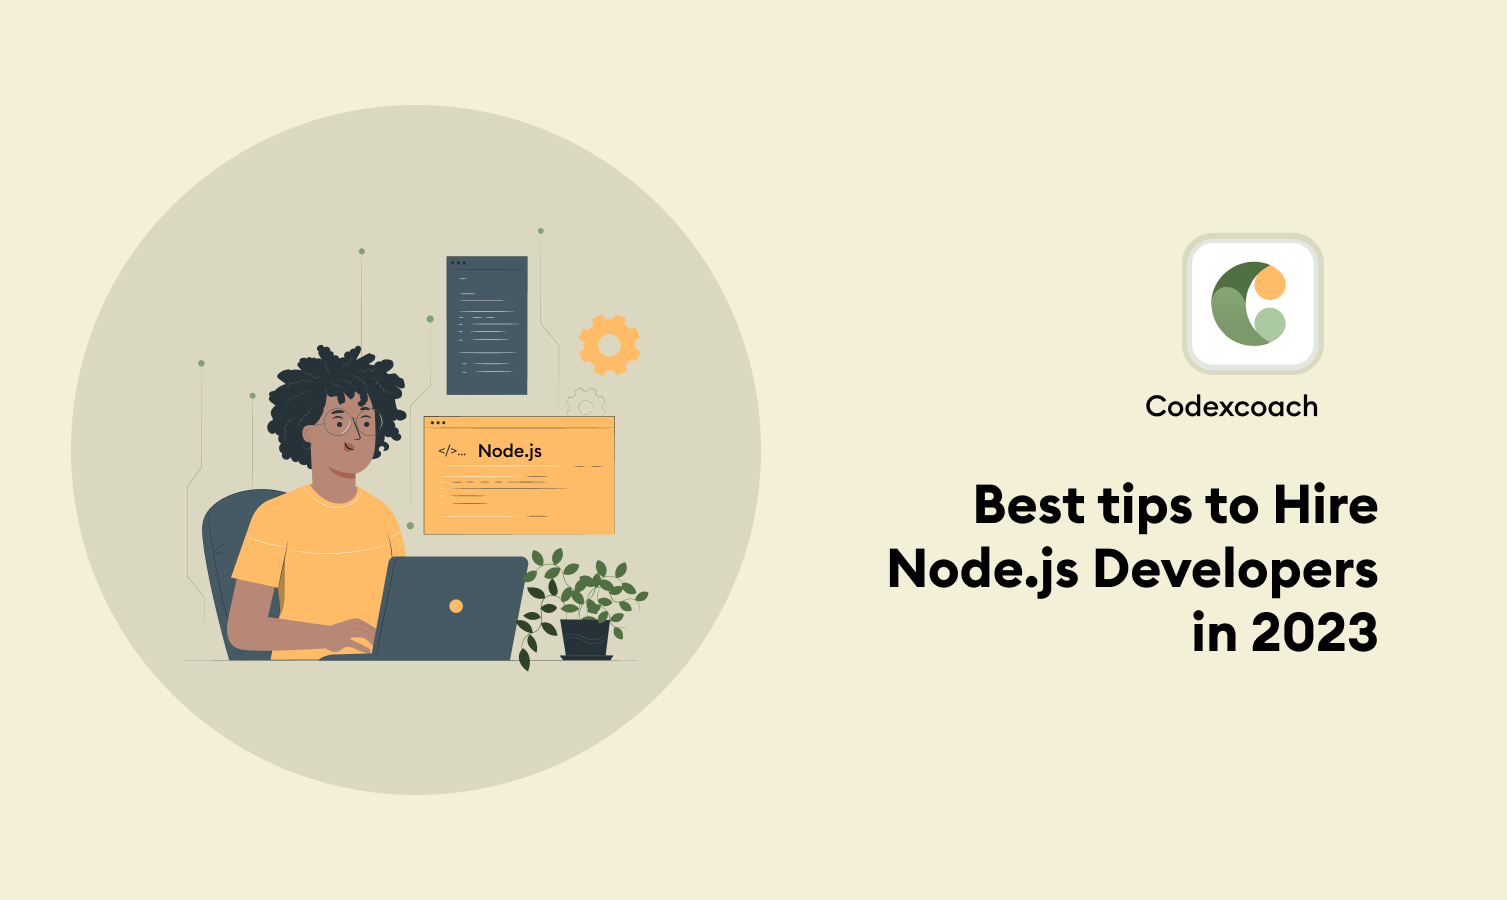 Best tips to Hire Node.js Developers in 2023